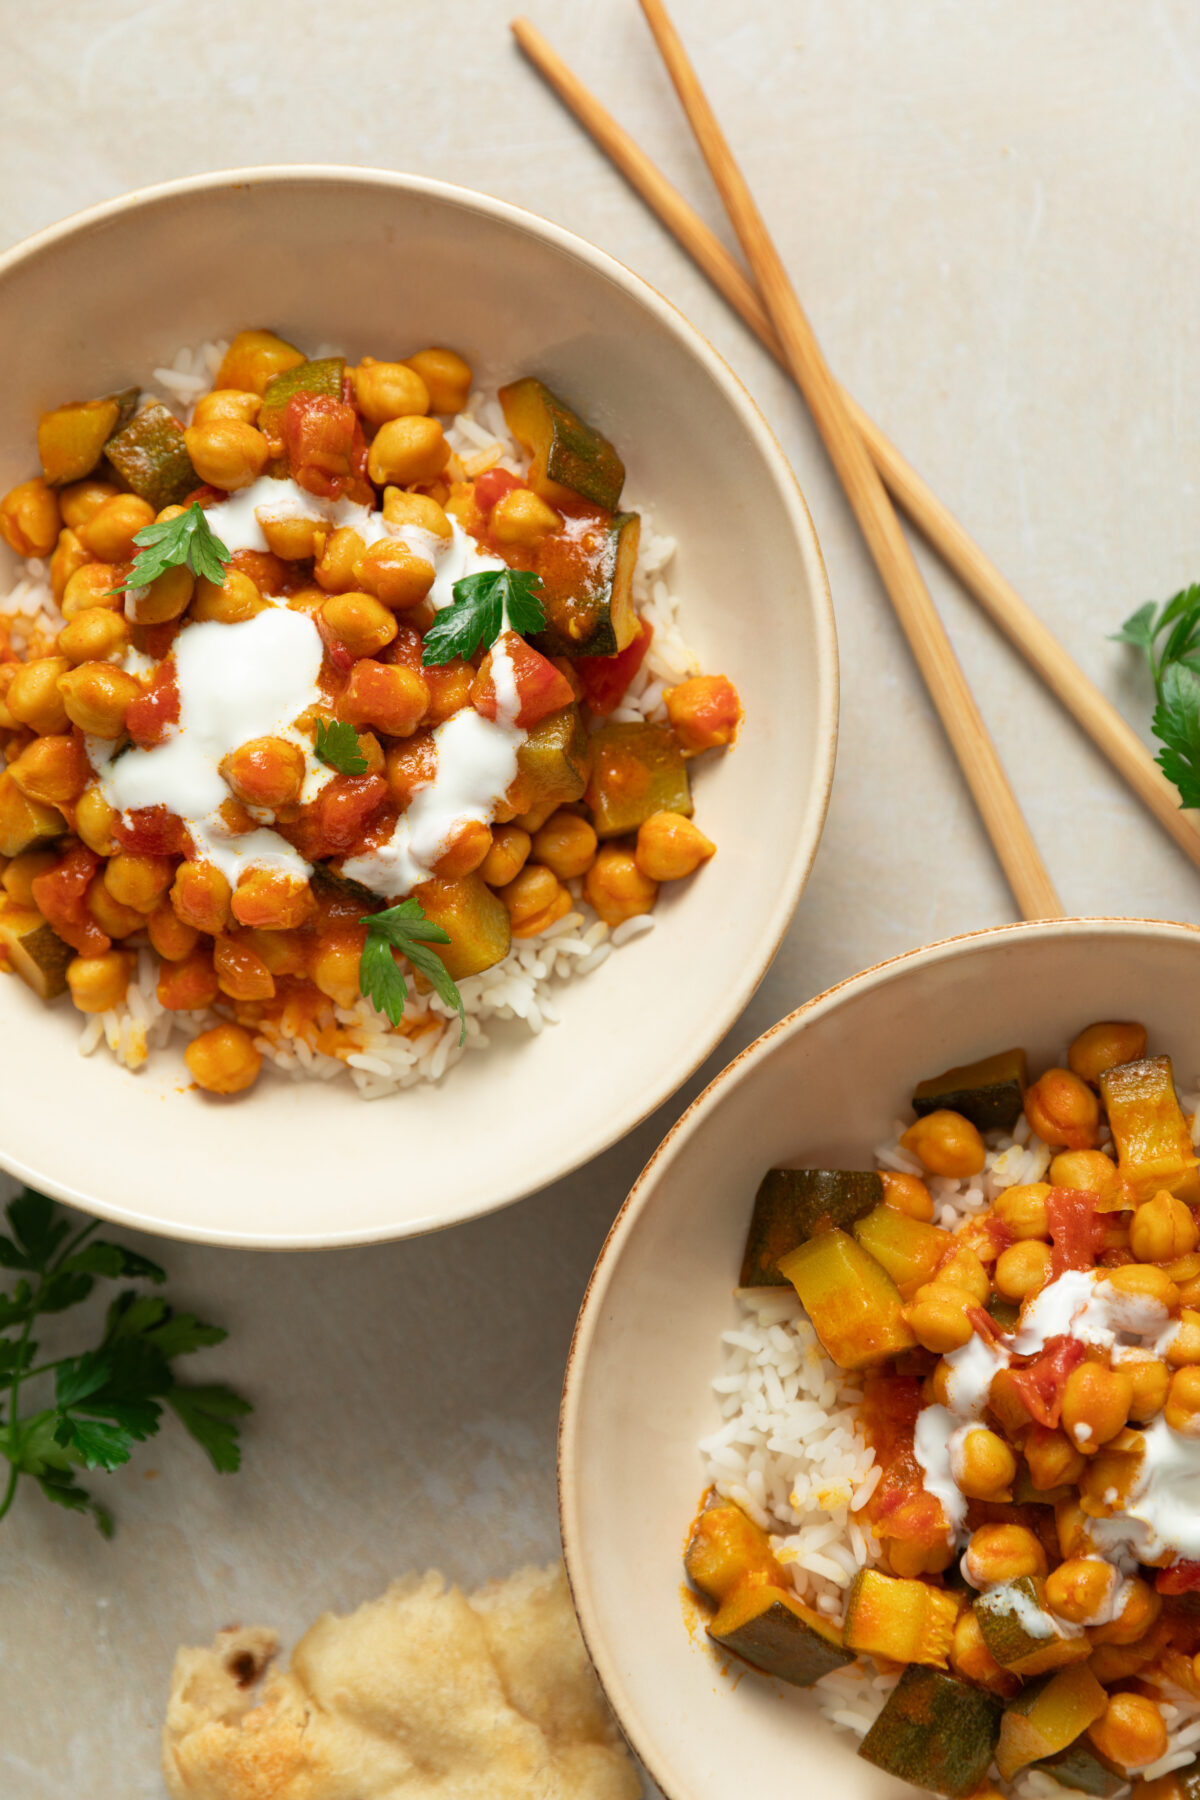 Creamy Chickpea and Vegetable Stew